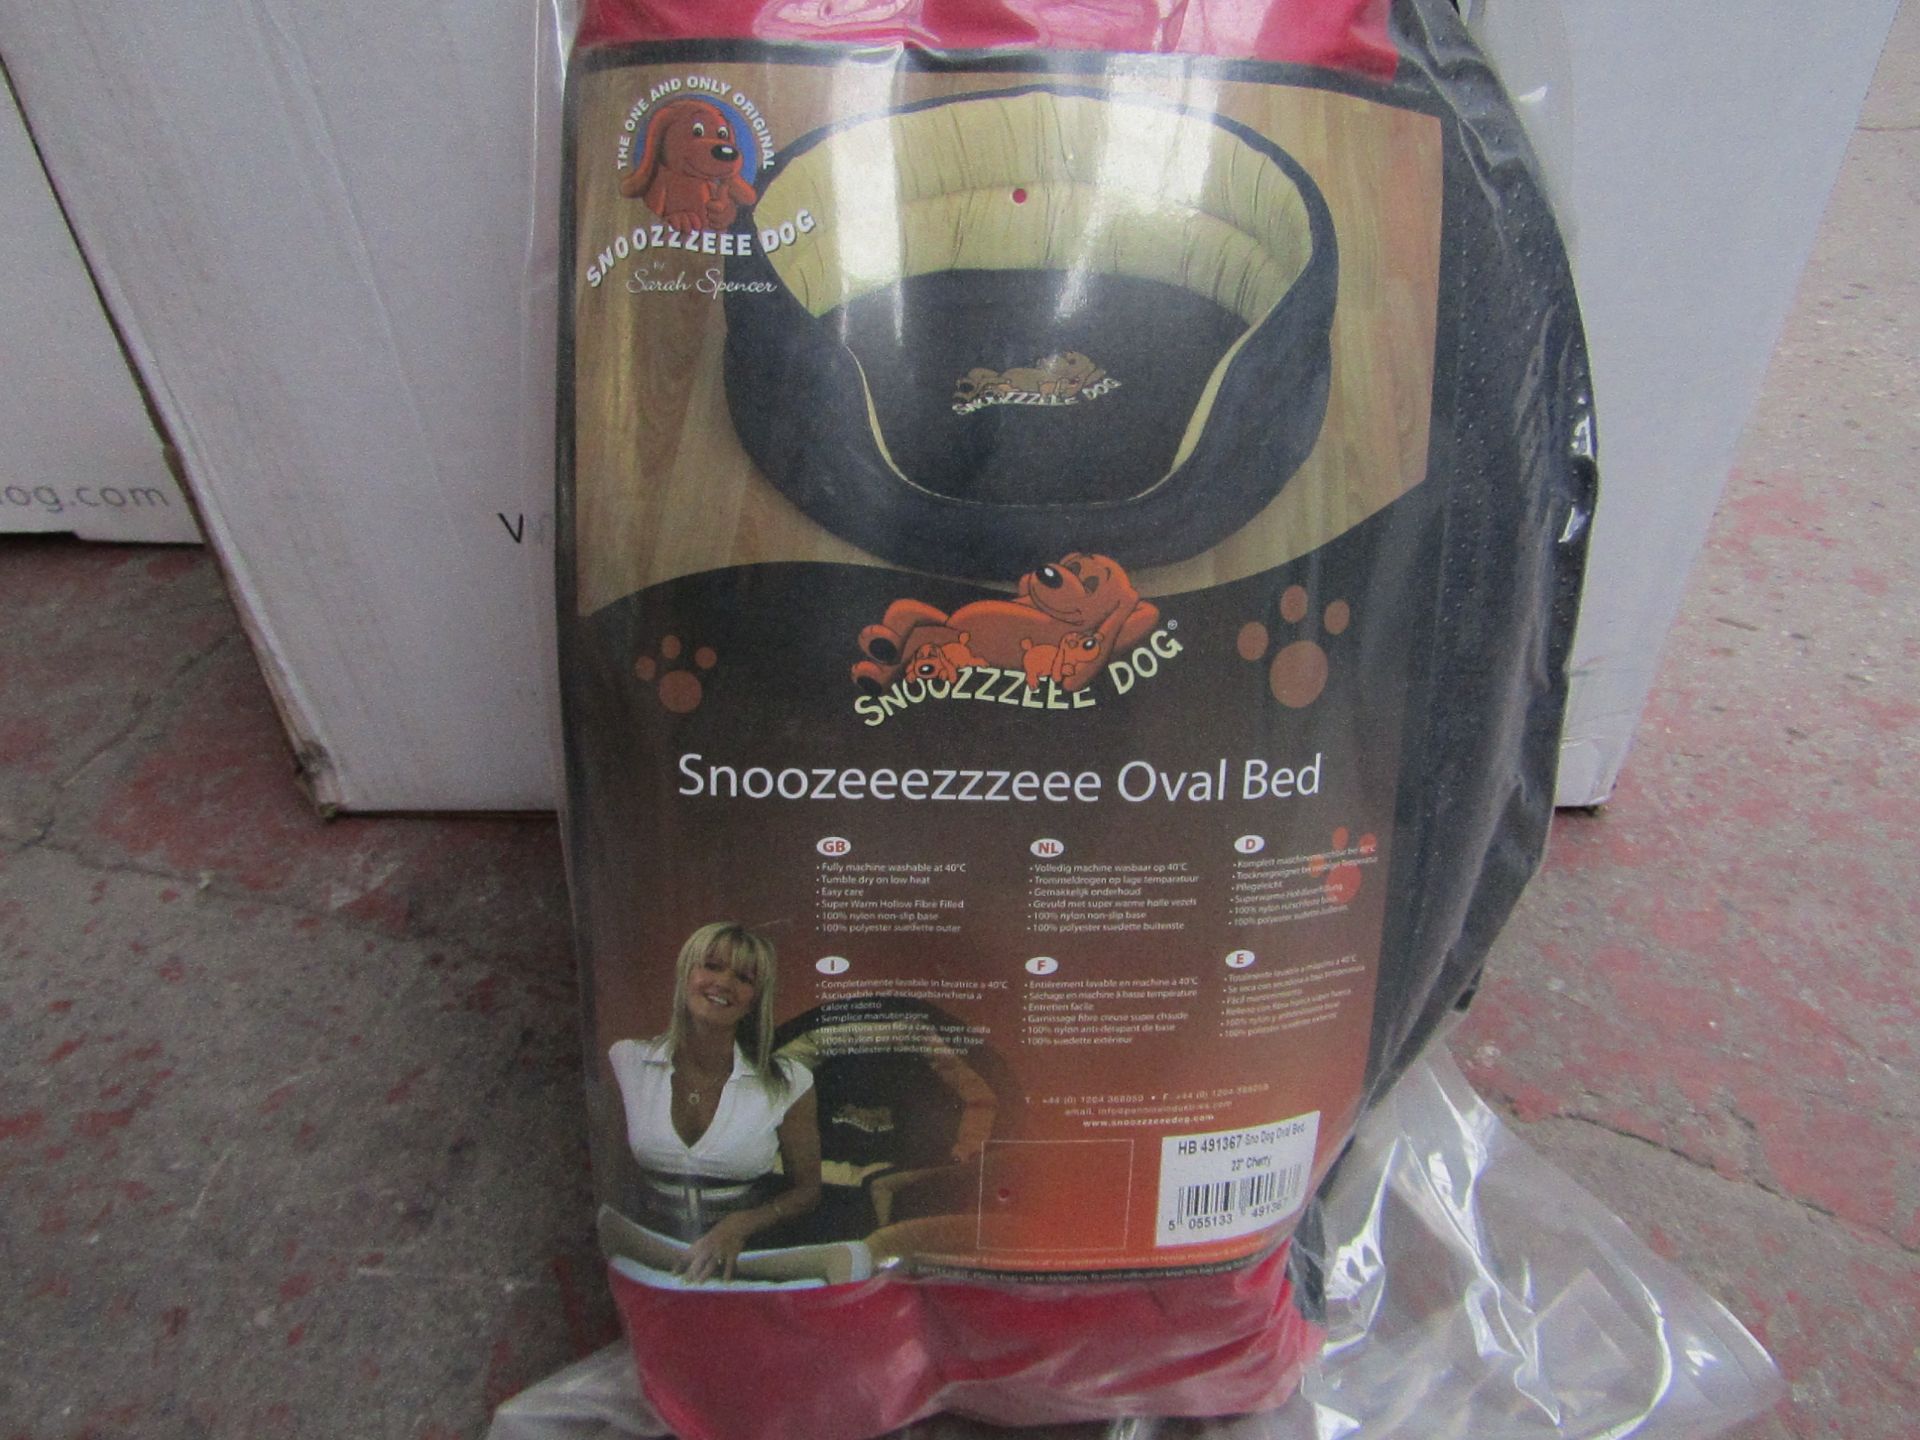 4x Snoozzzeee Dog - Cherry Red Oval Dog Bed (23") - New & Packaged.